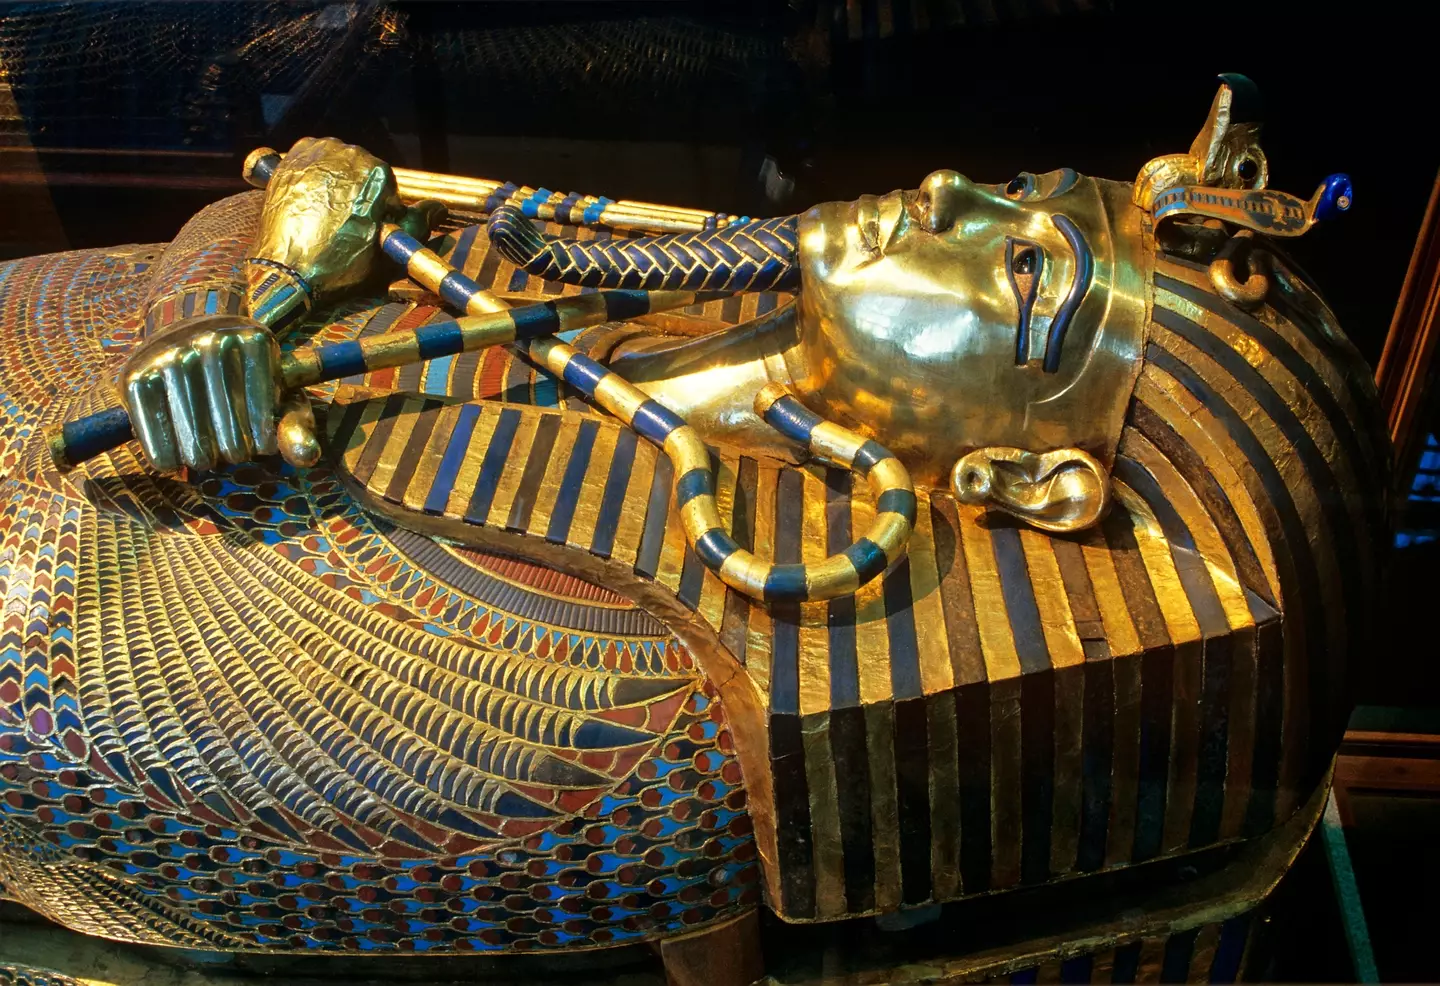 There has always been great interest in Tutankhamun.